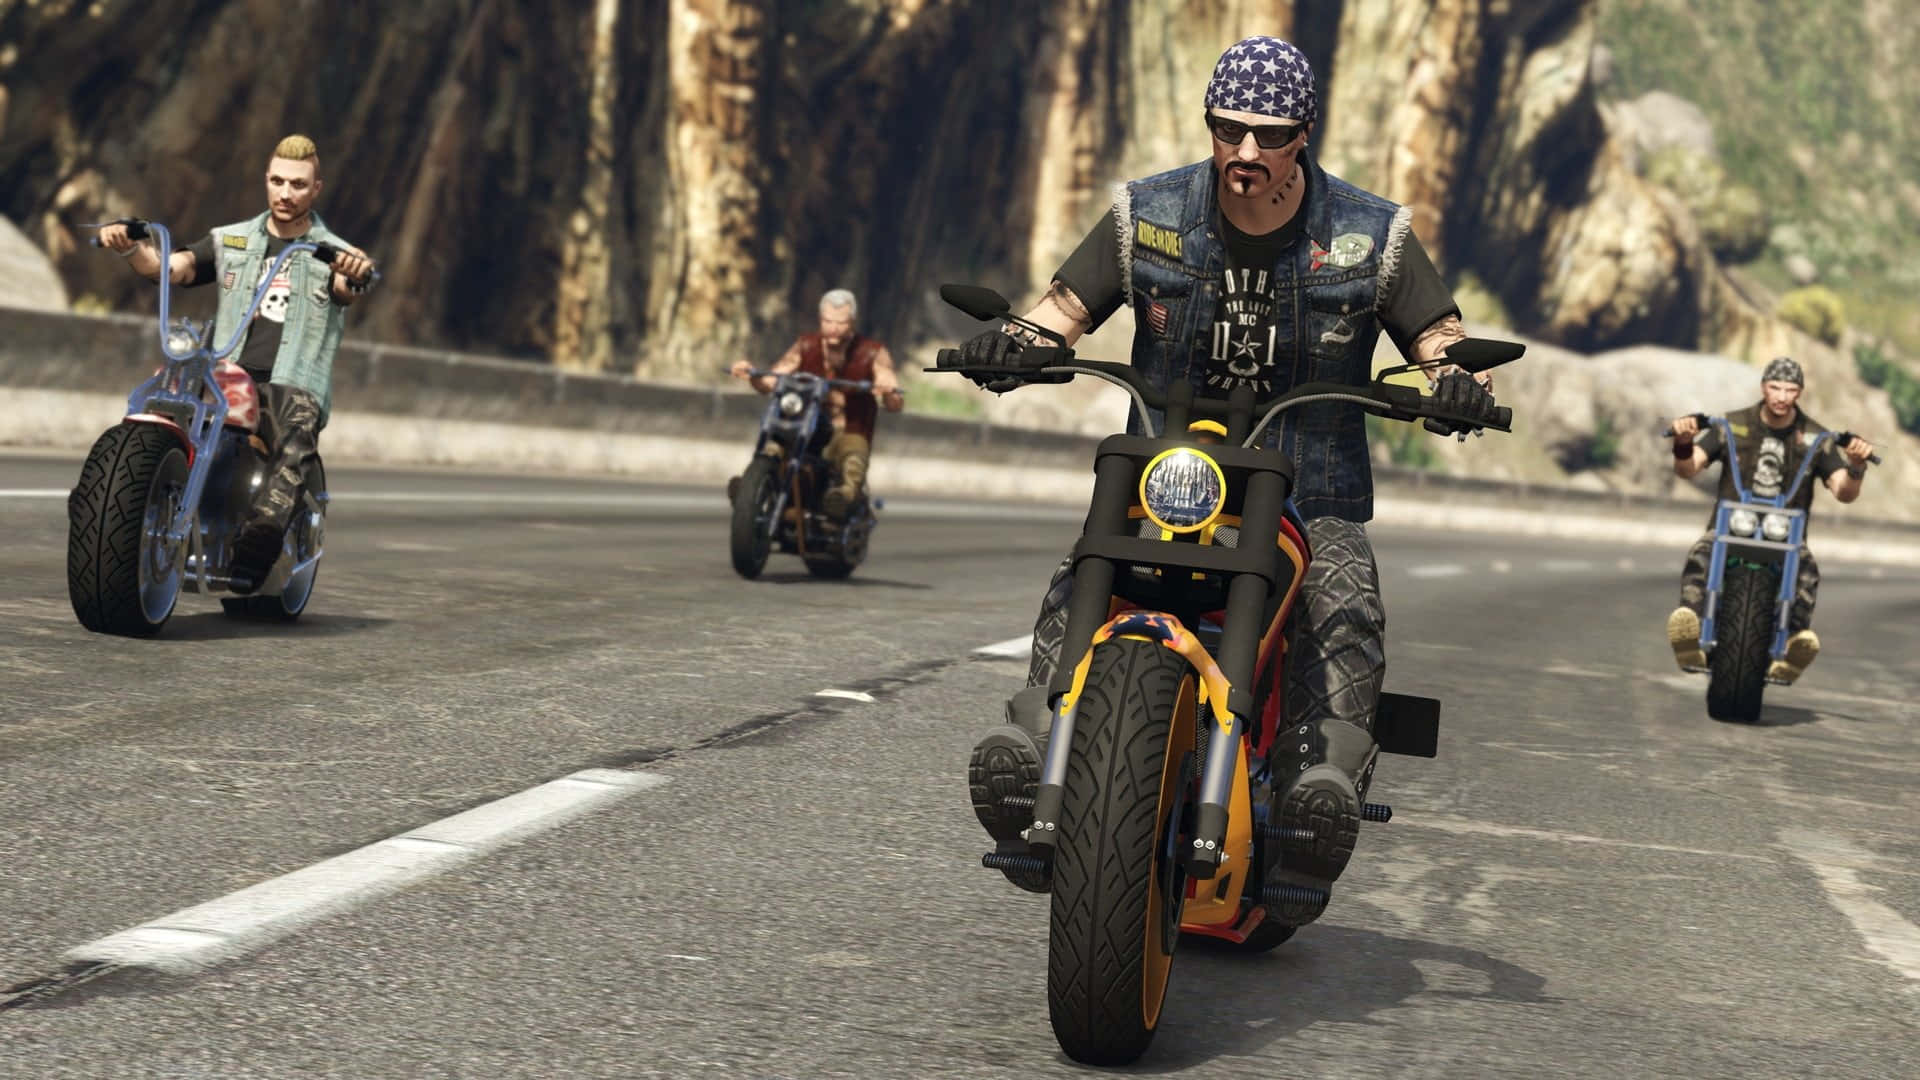 Motorcycle Group Ride Gta Picture